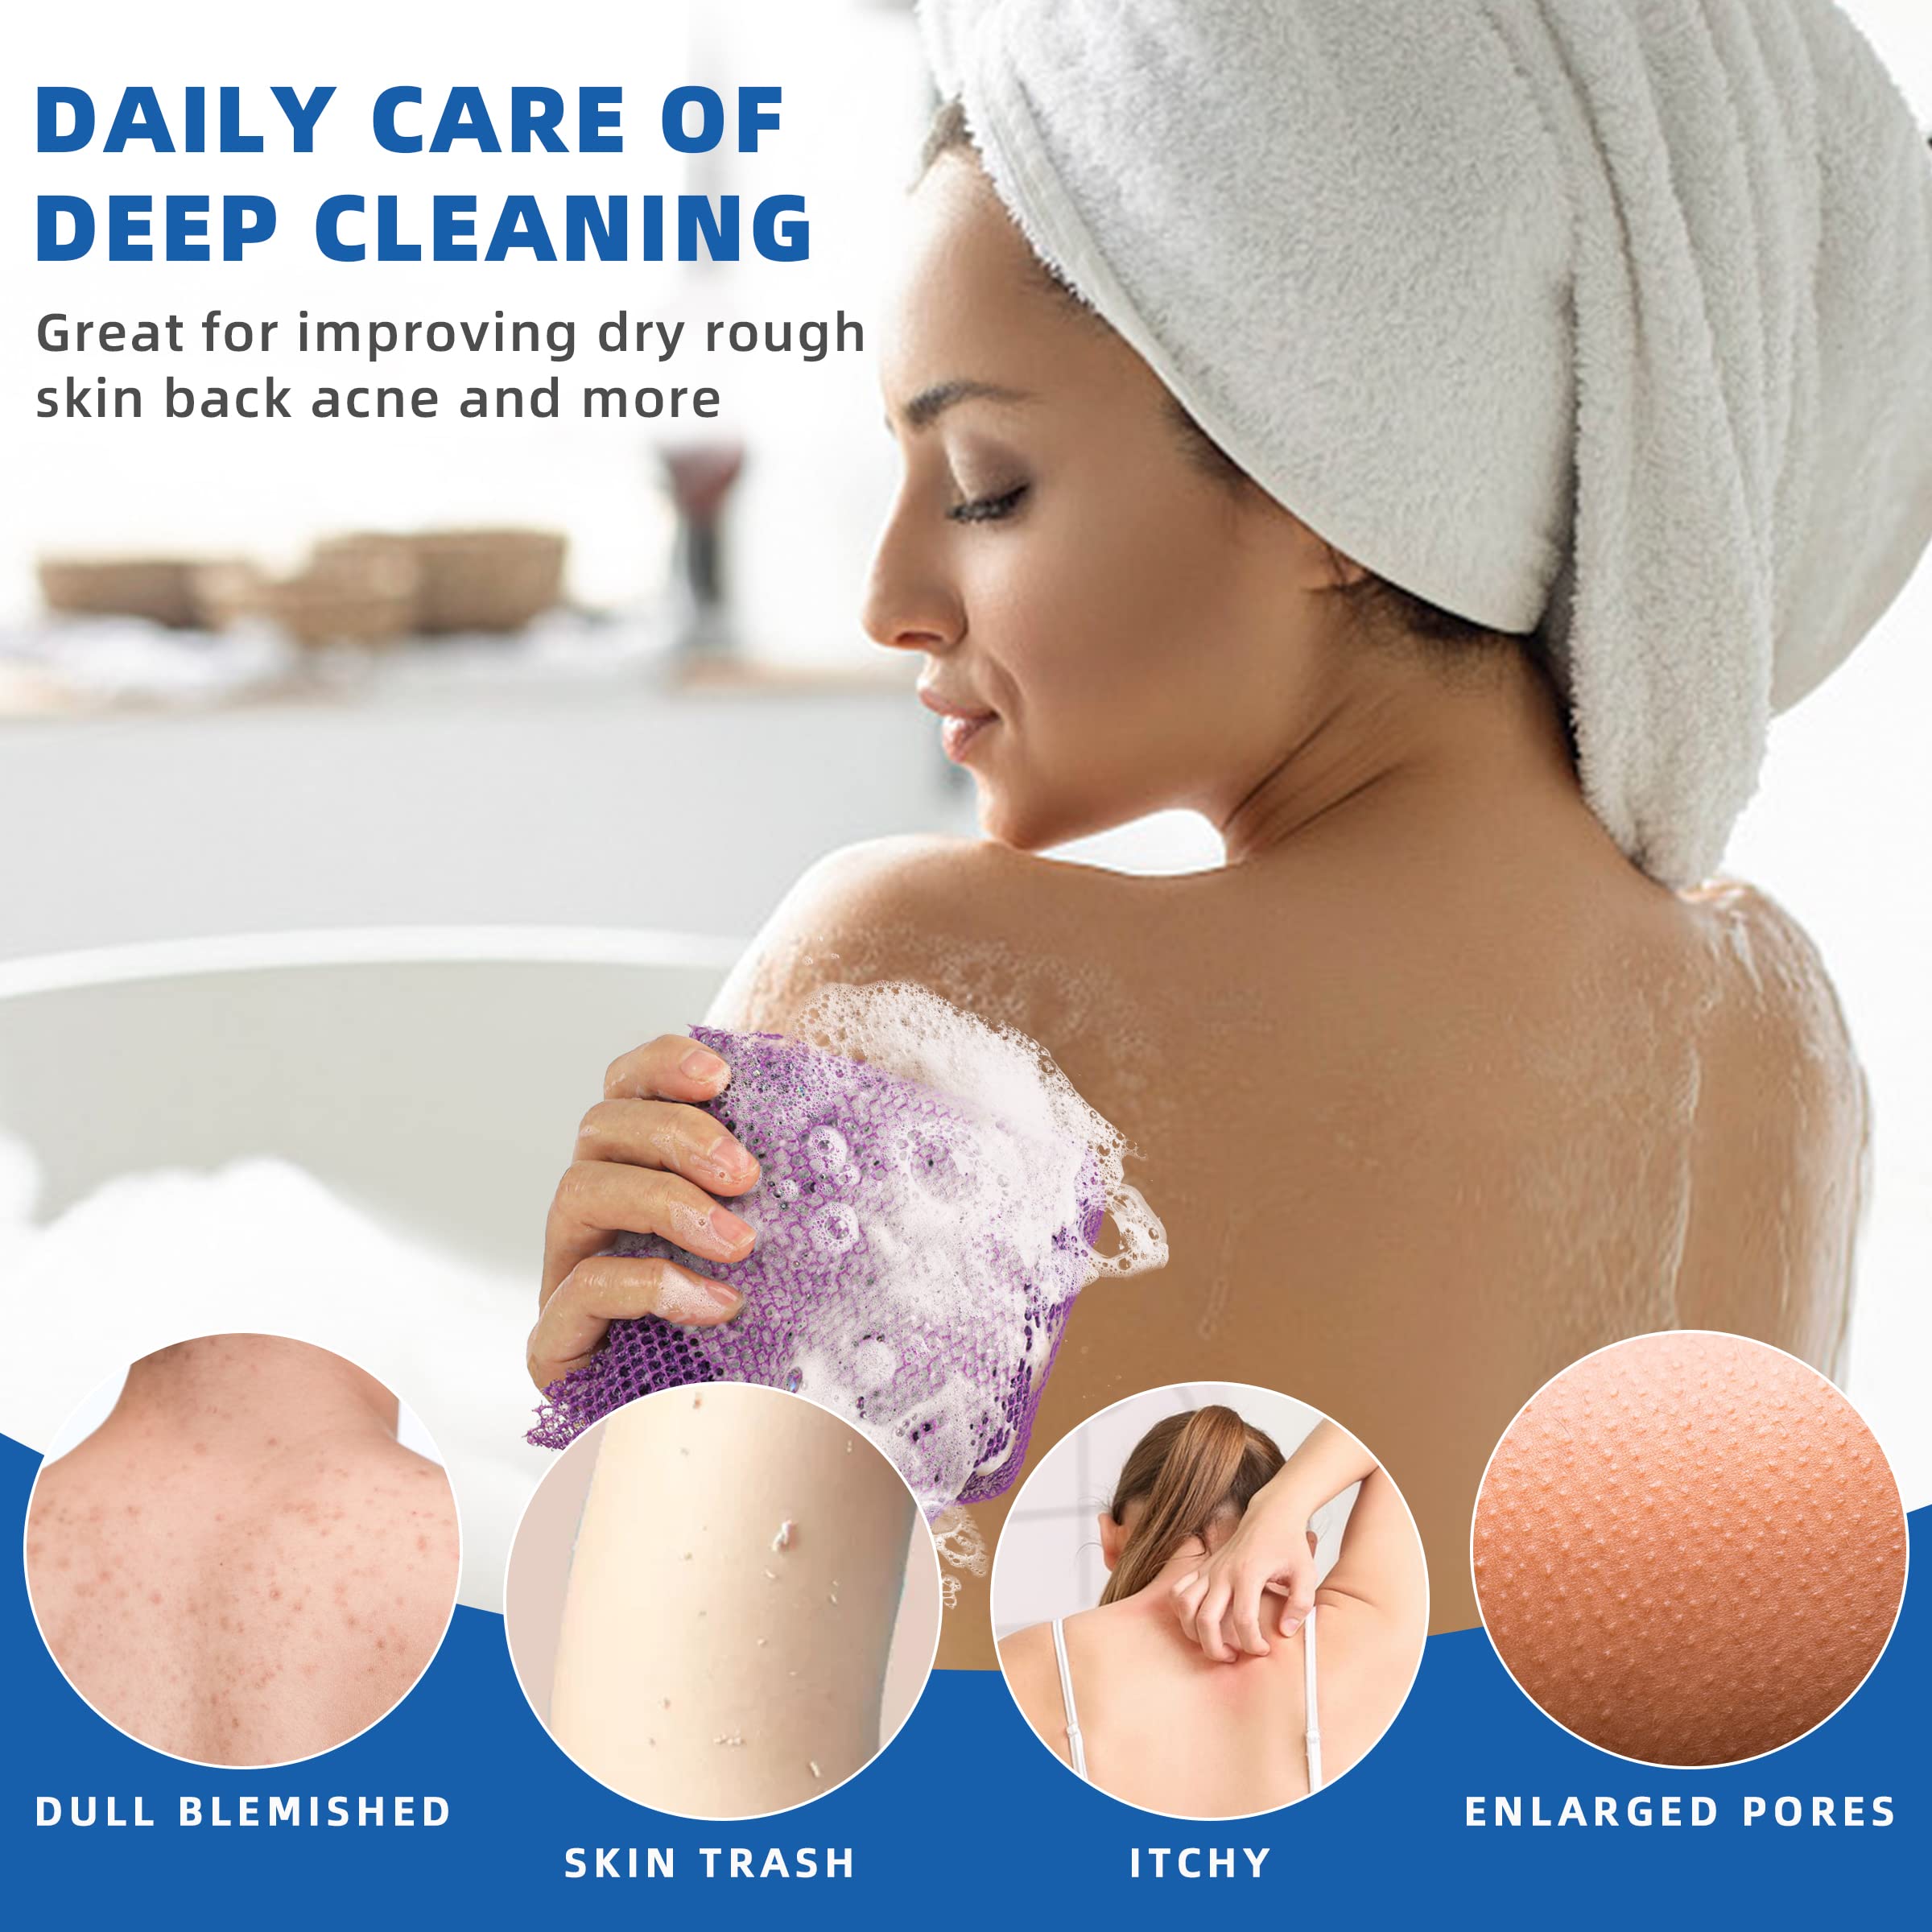 6 Pieces African Net Sponge African Exfoliating Net Long African Bath Sponge Washcloth Shower Net African Body Scrubber Net for Skin Smoother Daily Use(Pink,Yellow,Purple,Black,Blue,Brown)